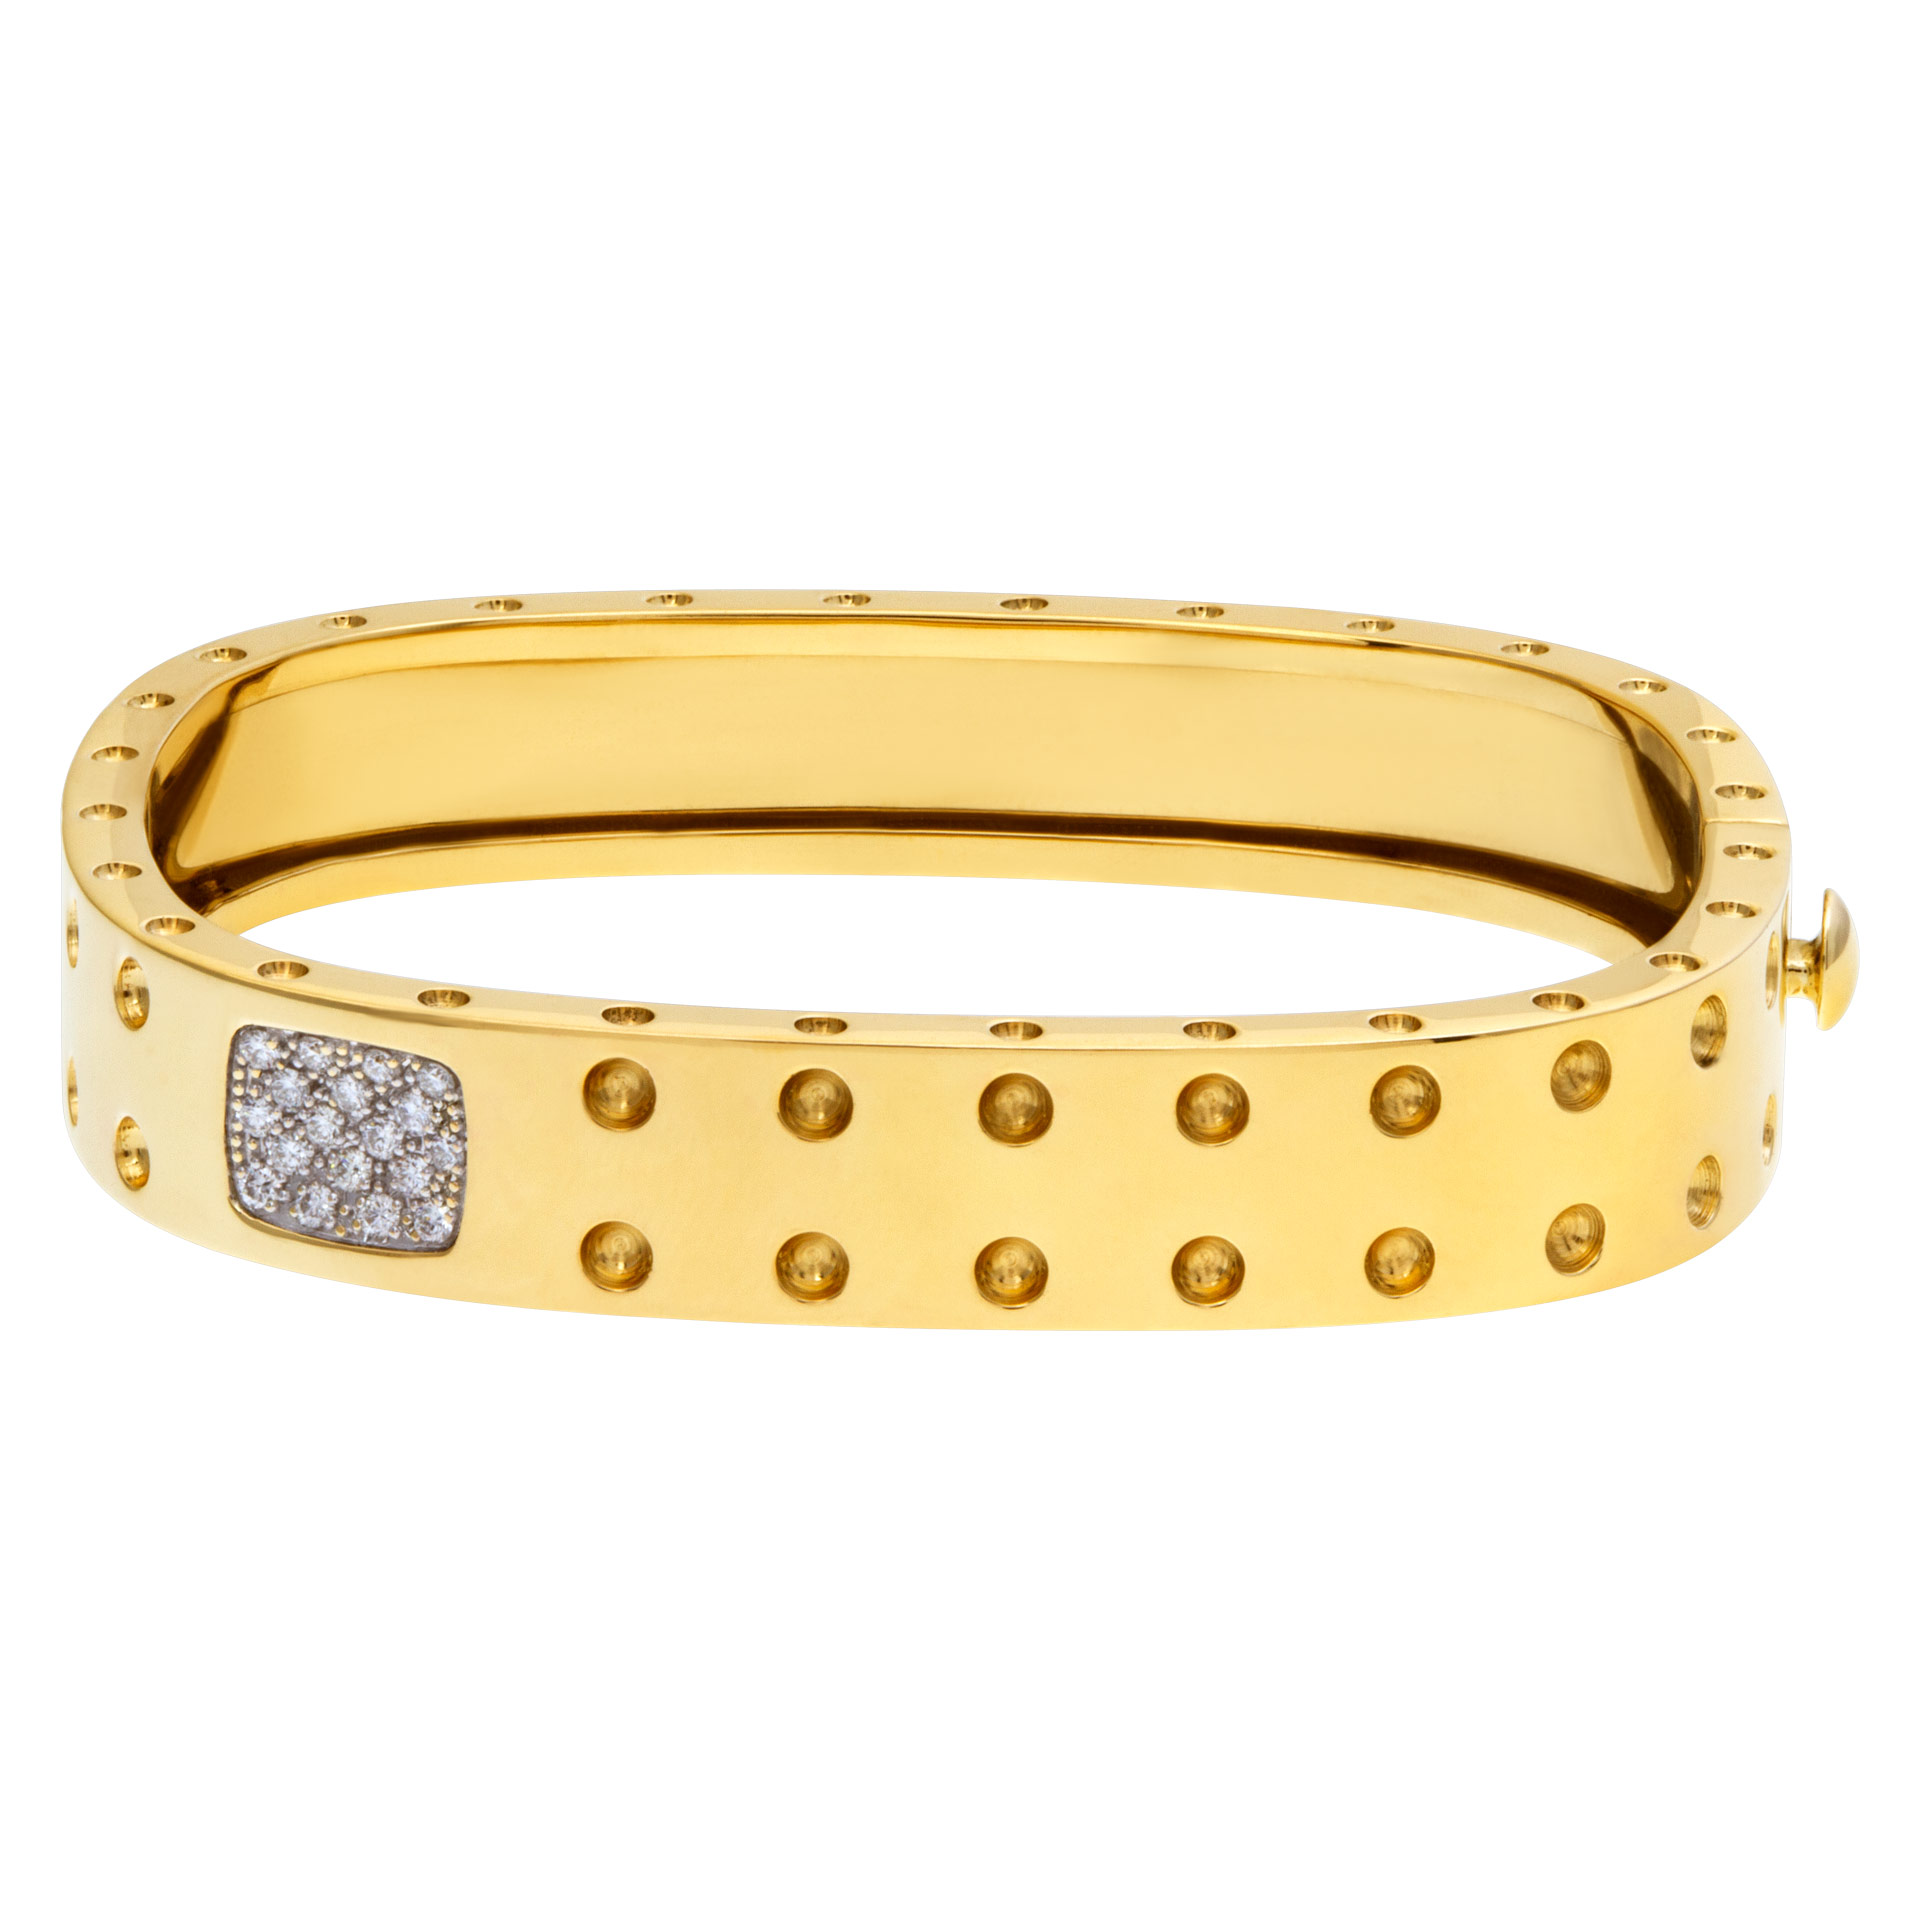 Roberto Coin Pois Moi collection, modern, rounded square cuff in 18K yellow gold, with a diamond studded station